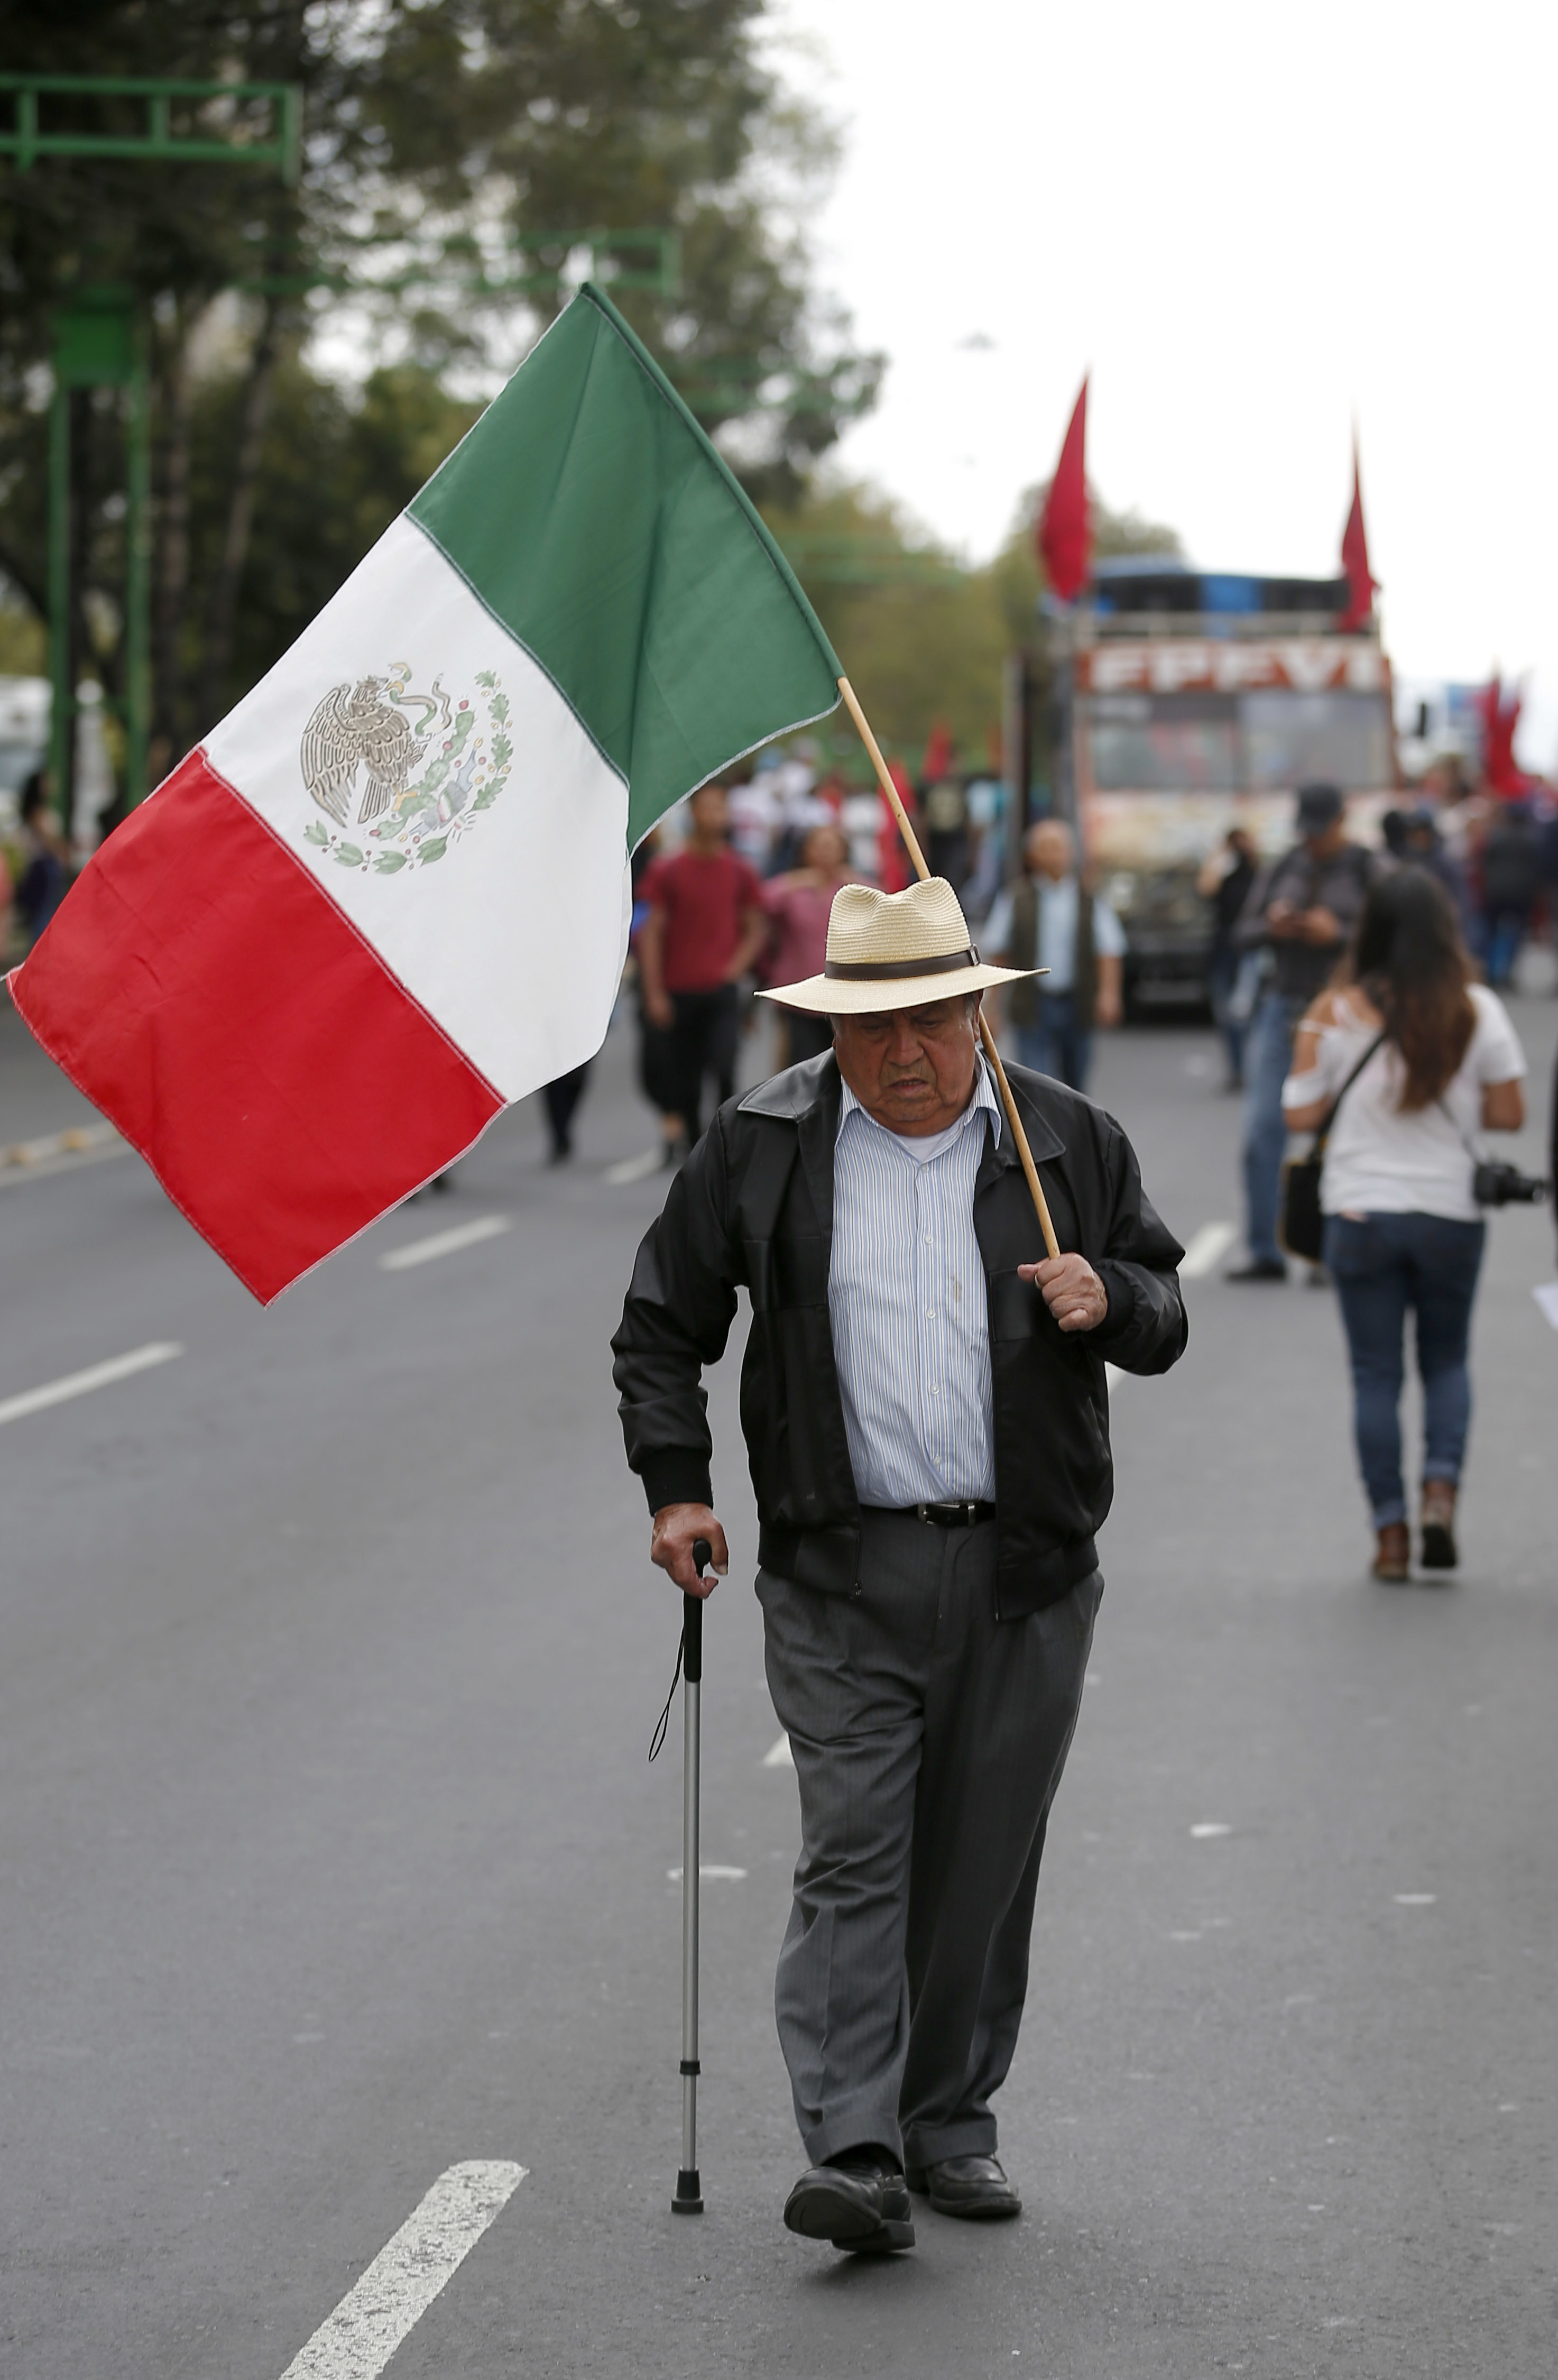 A man walk with a Mexican flag as demonstrators march in remembrance of the 1968 Tlatelolco student massacre in Mexico City, Tuesday, Oct. 2, 2018. Mexico is marking the massacre of student protesters by army troops 50 years ago. (AP Photo/Eduardo Verdugo)